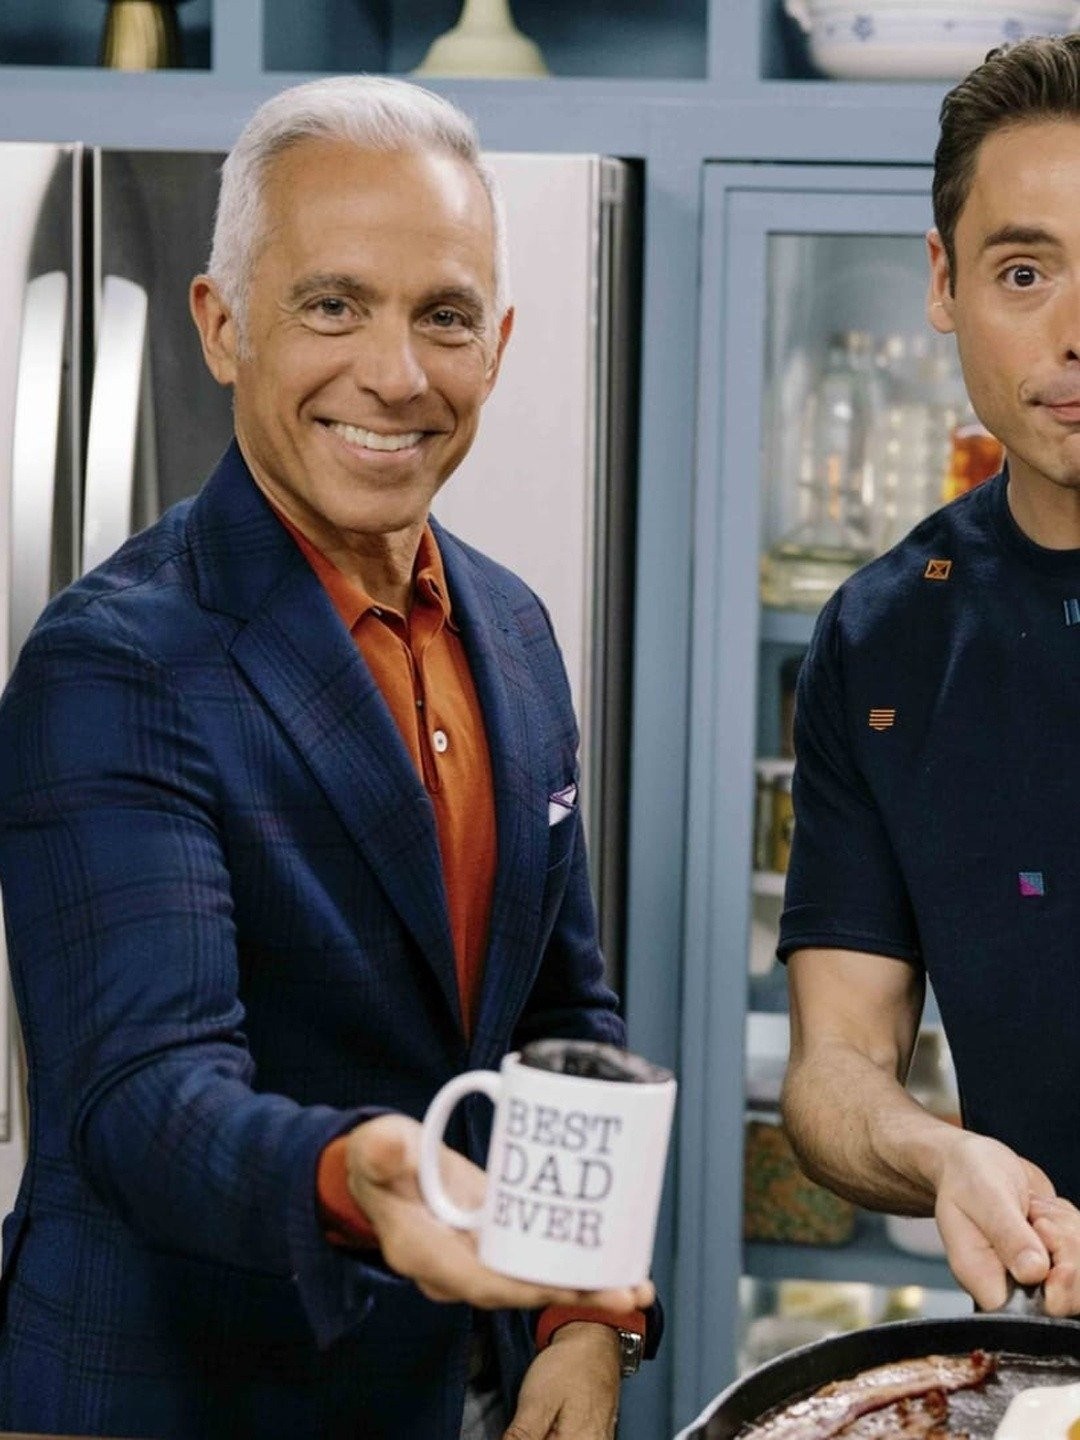 Sunday Brunch Hosted by Katie Lee & Geoffrey Zakarian Part of the